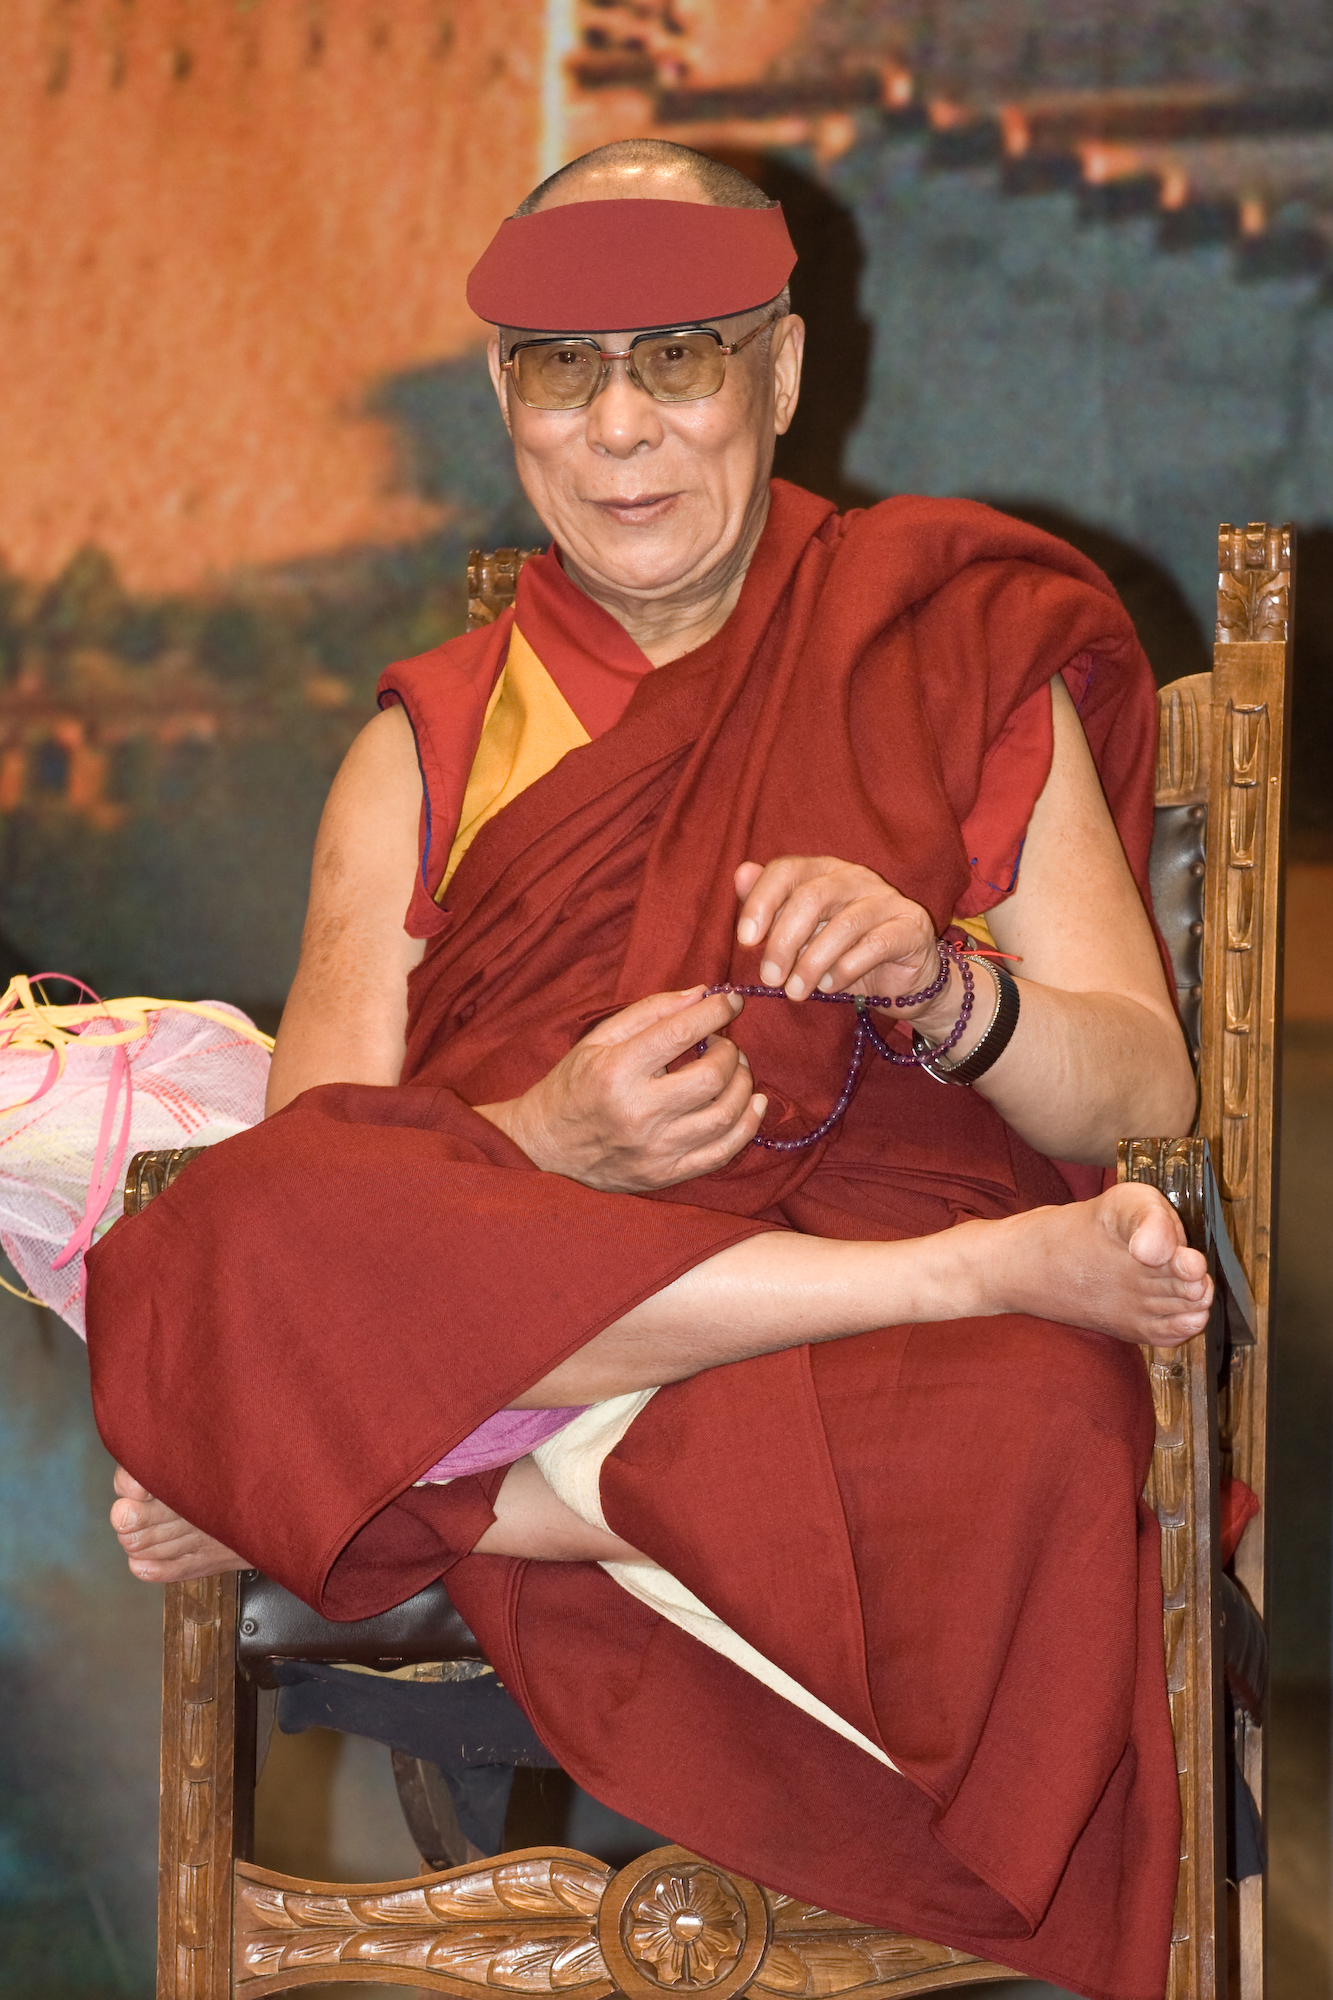 His Holiness the XIV Dalai Lama: Milarepa’s story testifies to the fact that it is through hardship and constant practice that eventually leads to realization, not through a simple blessing or being touched on the head by another’s palm. 